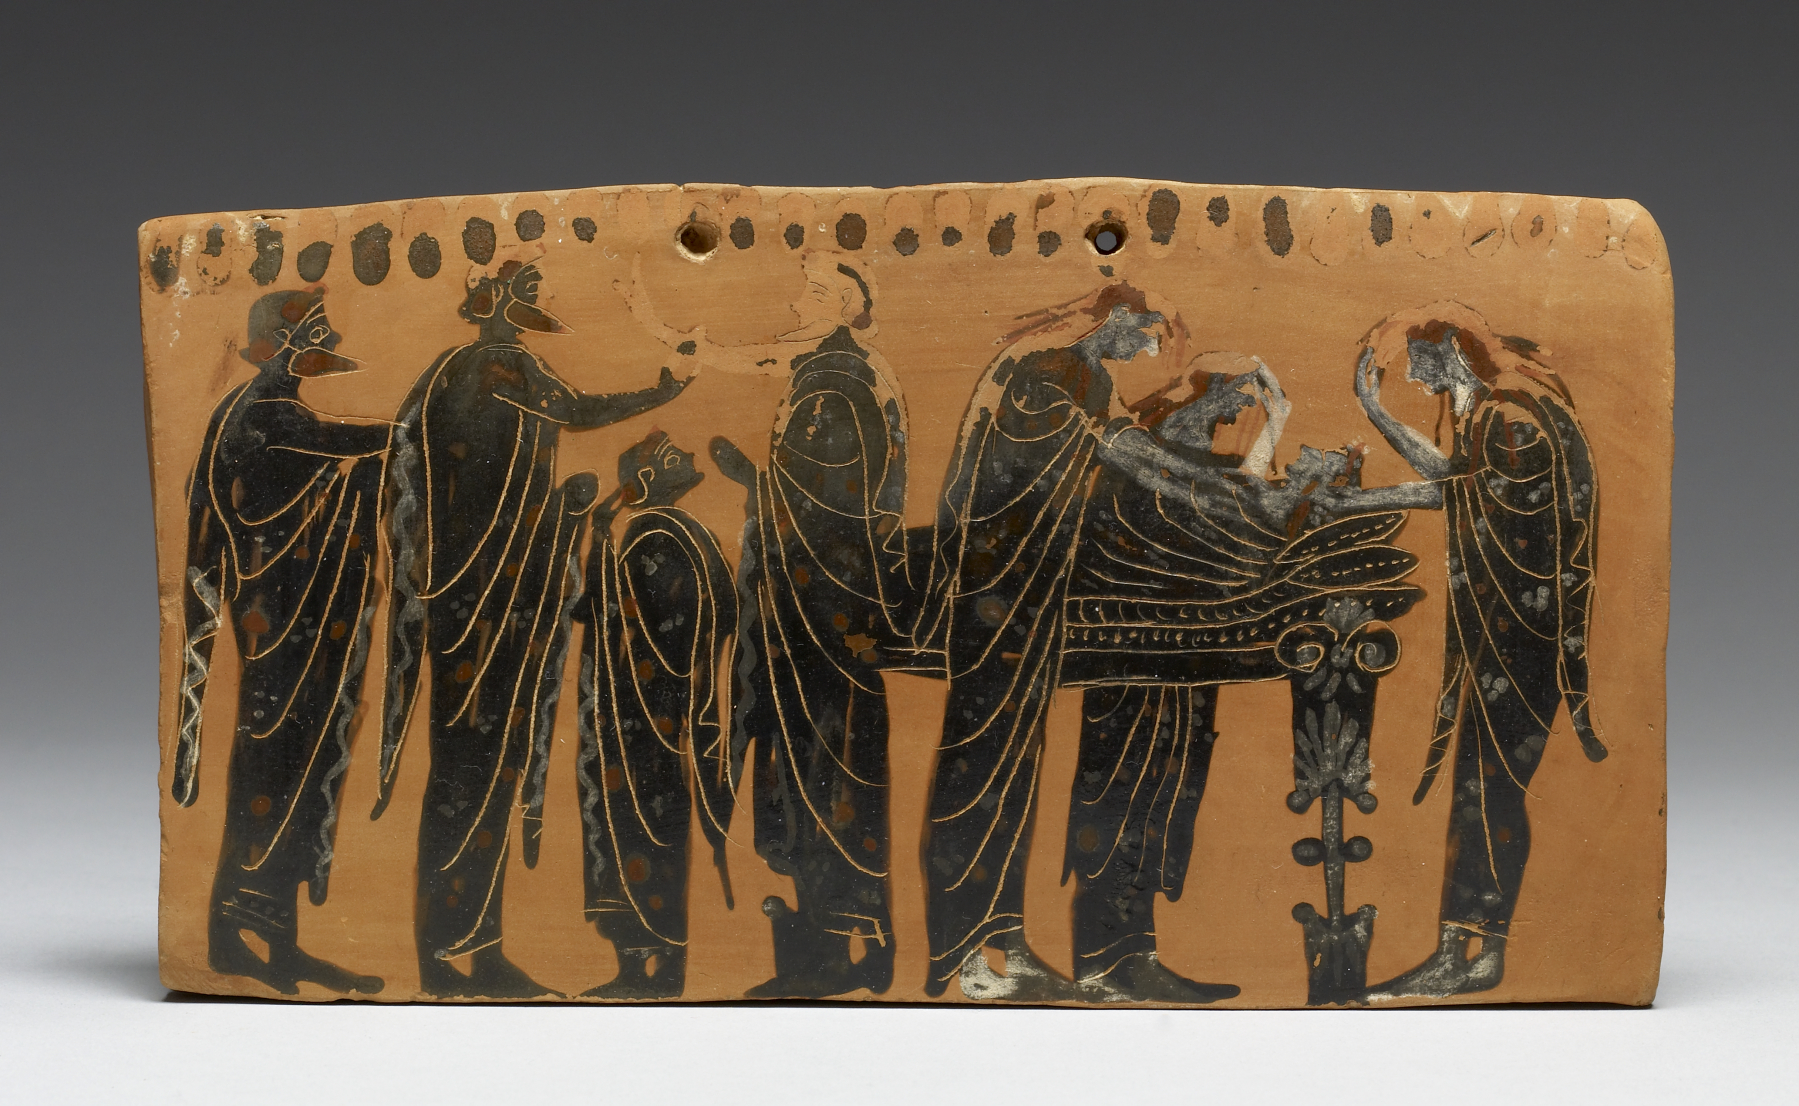  A red-figure painted terracotta tile depicting ancient Greek burial practices.